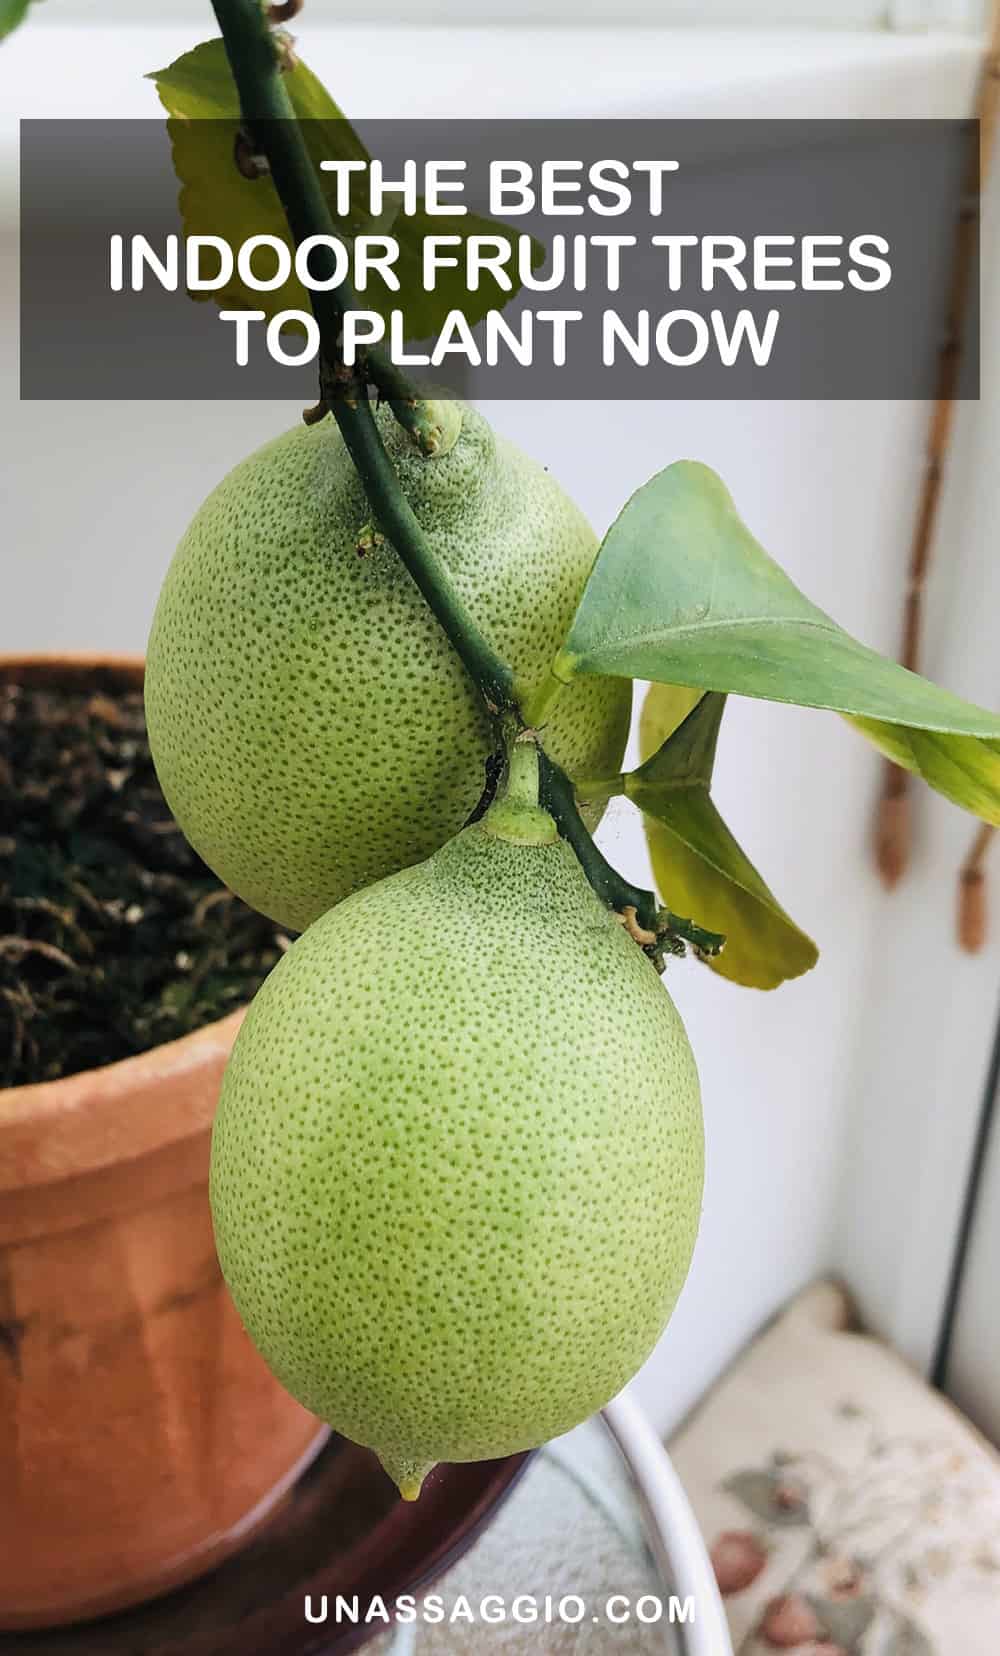 The Best Indoor Fruit Trees to Plant Now